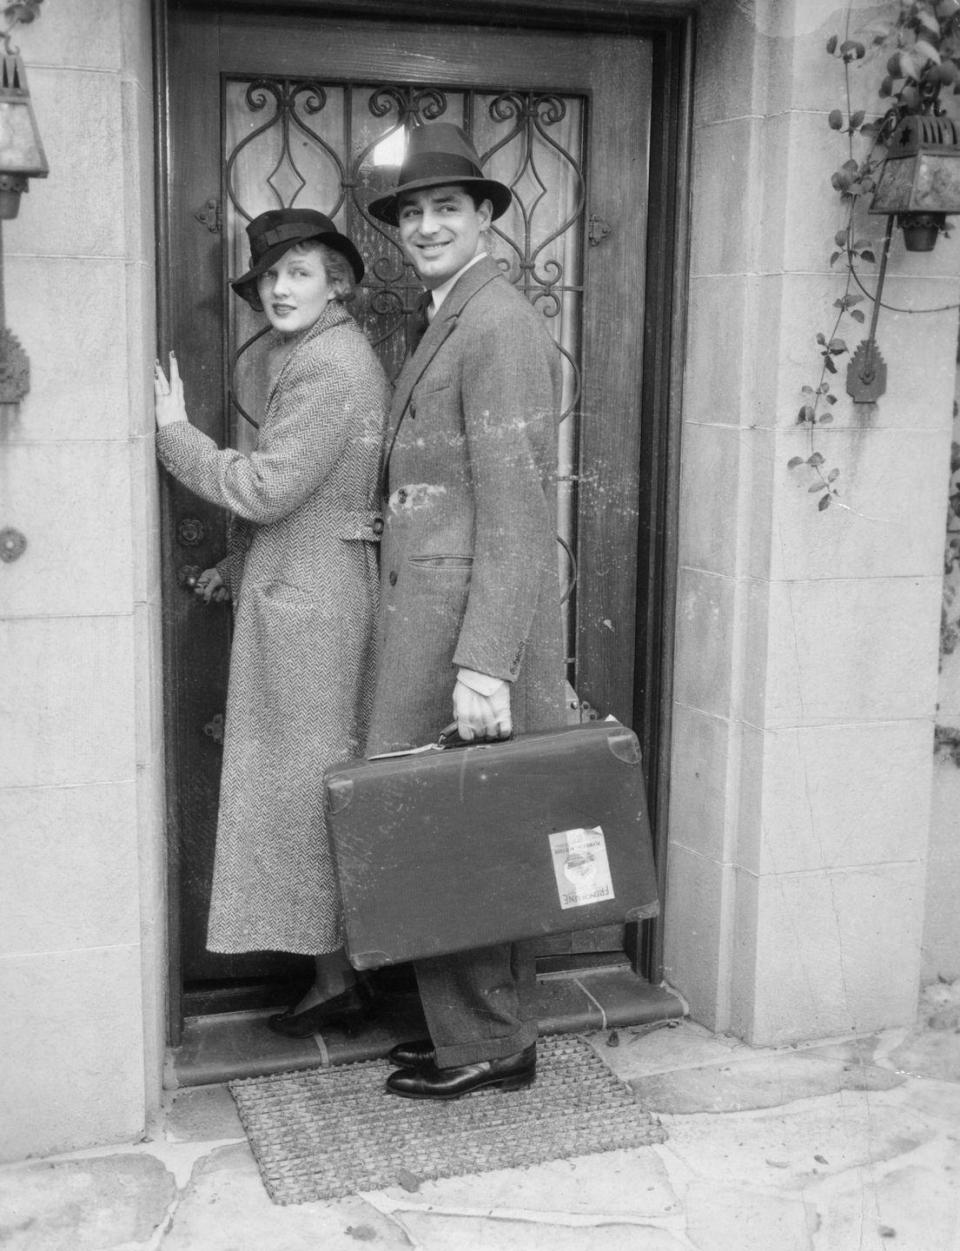 <p>Suitcase in hand, the American screen star and his actress wife arrive in Rome for their honeymoon. They got married on February 9 in London.</p>